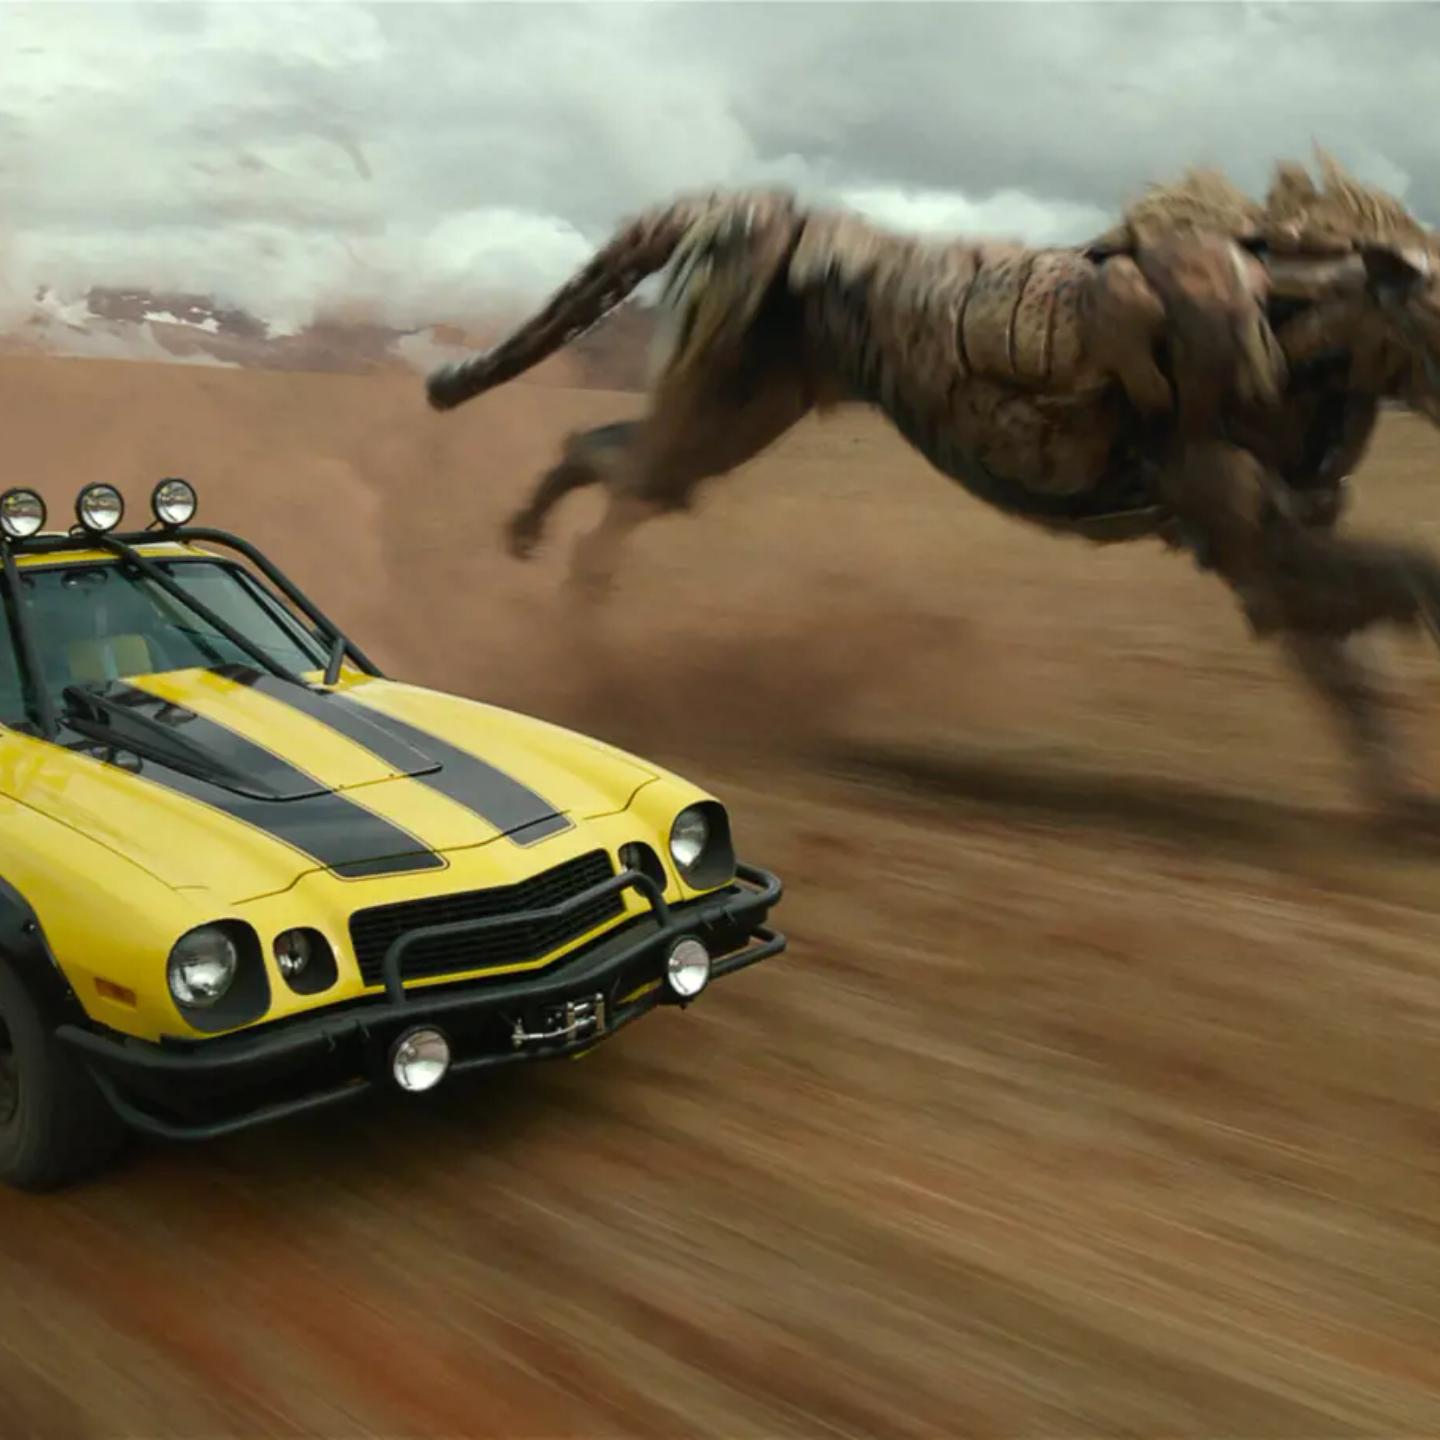 a horse jumping over a yellow car